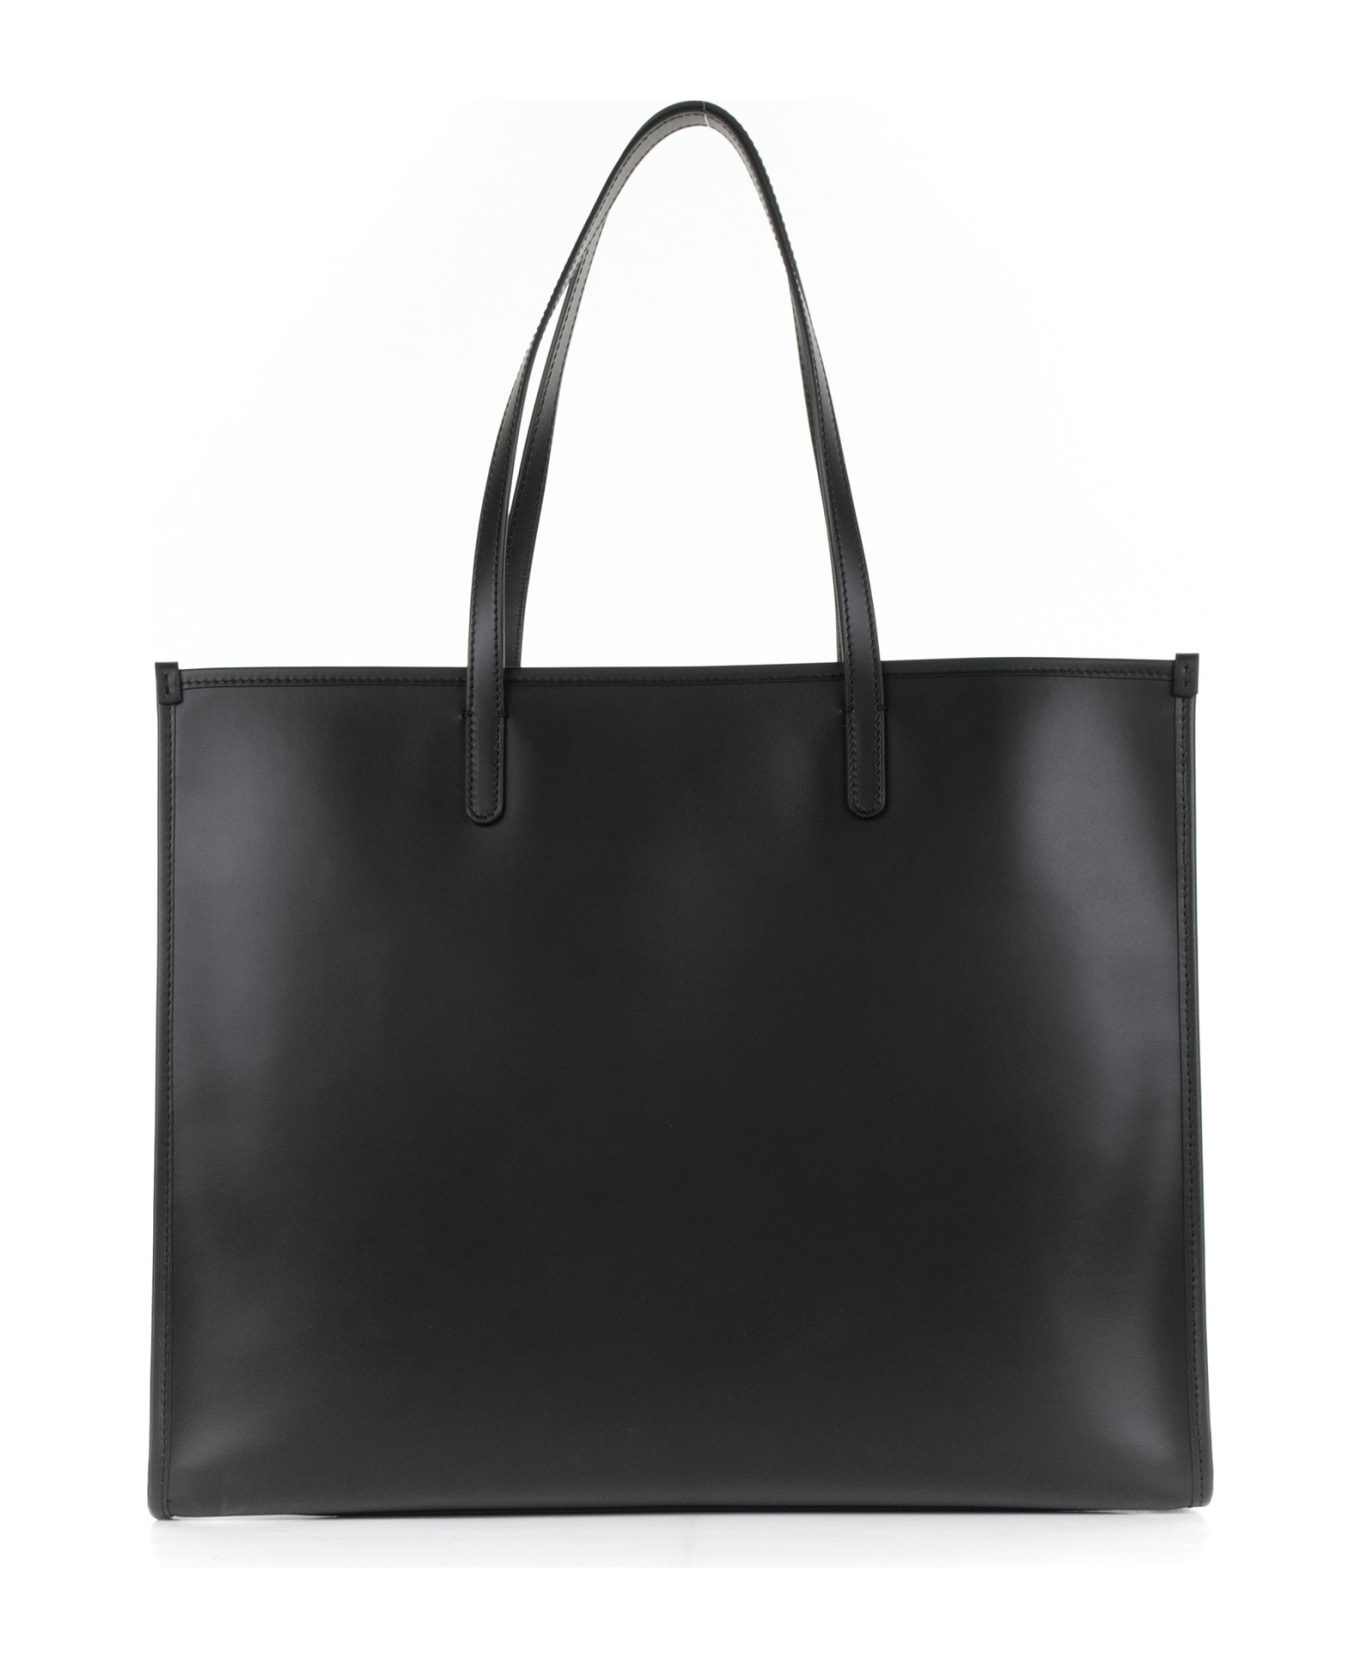 Dolce & Gabbana Leather Shopping Bag With Embossed Logo - NERO